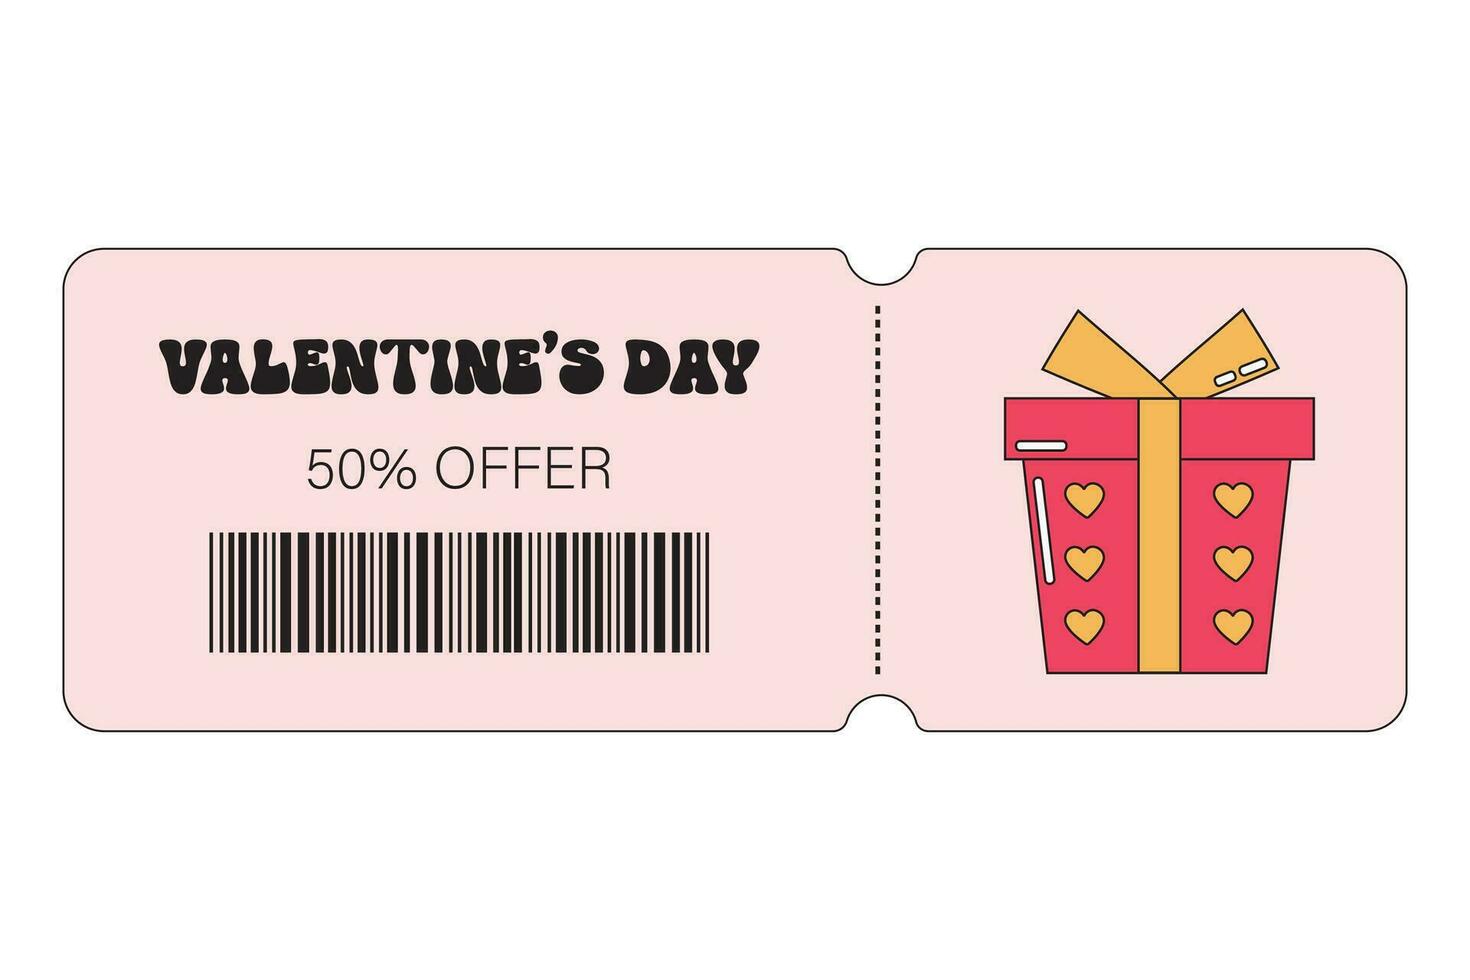 Valentine sale, special offers, discounts coupon for shopping, gifts, restaurants, cinemas, cafes. Voucher set with love, cute elements in groovy retro style. vector